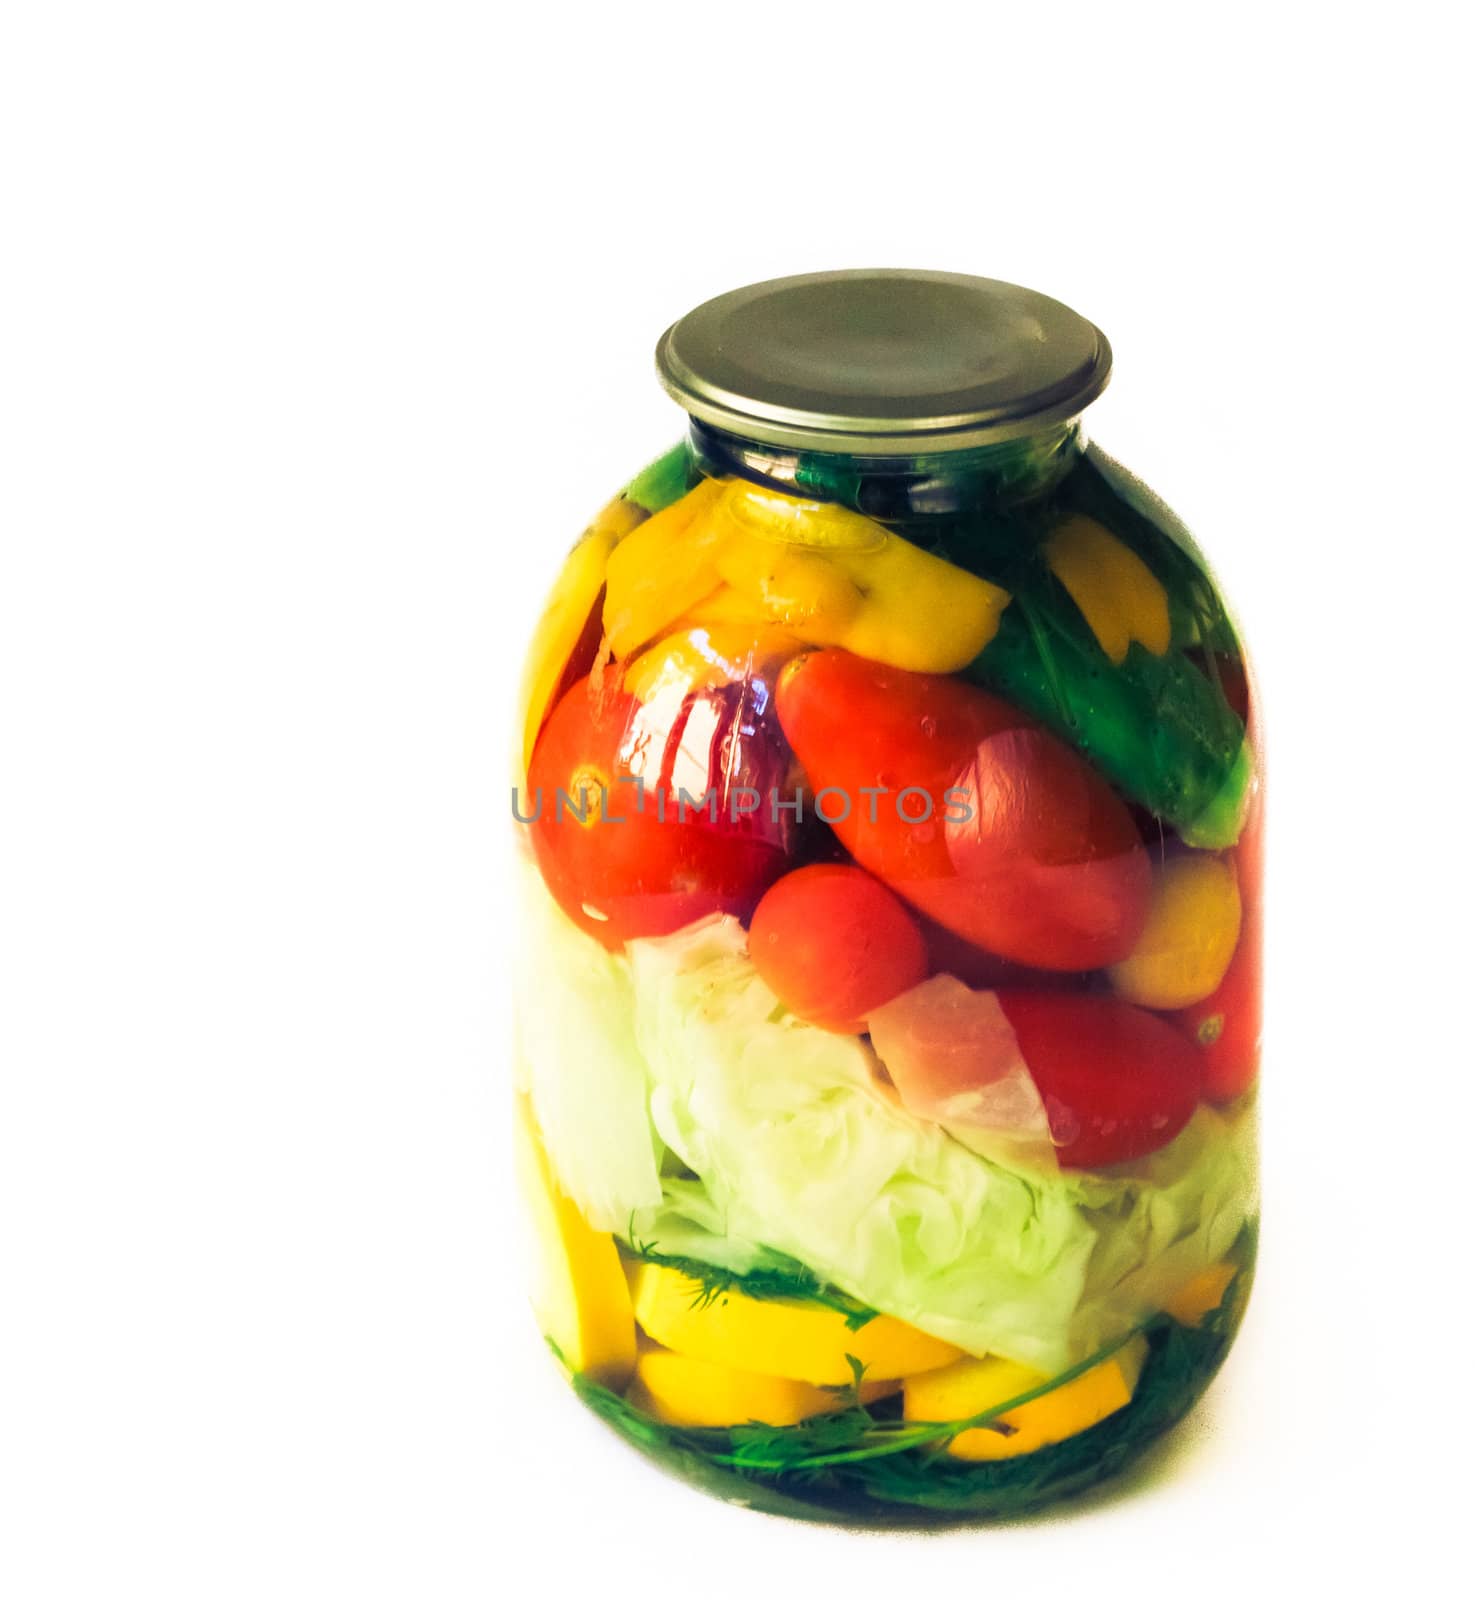 Preserved vegetables on white background by ryhor